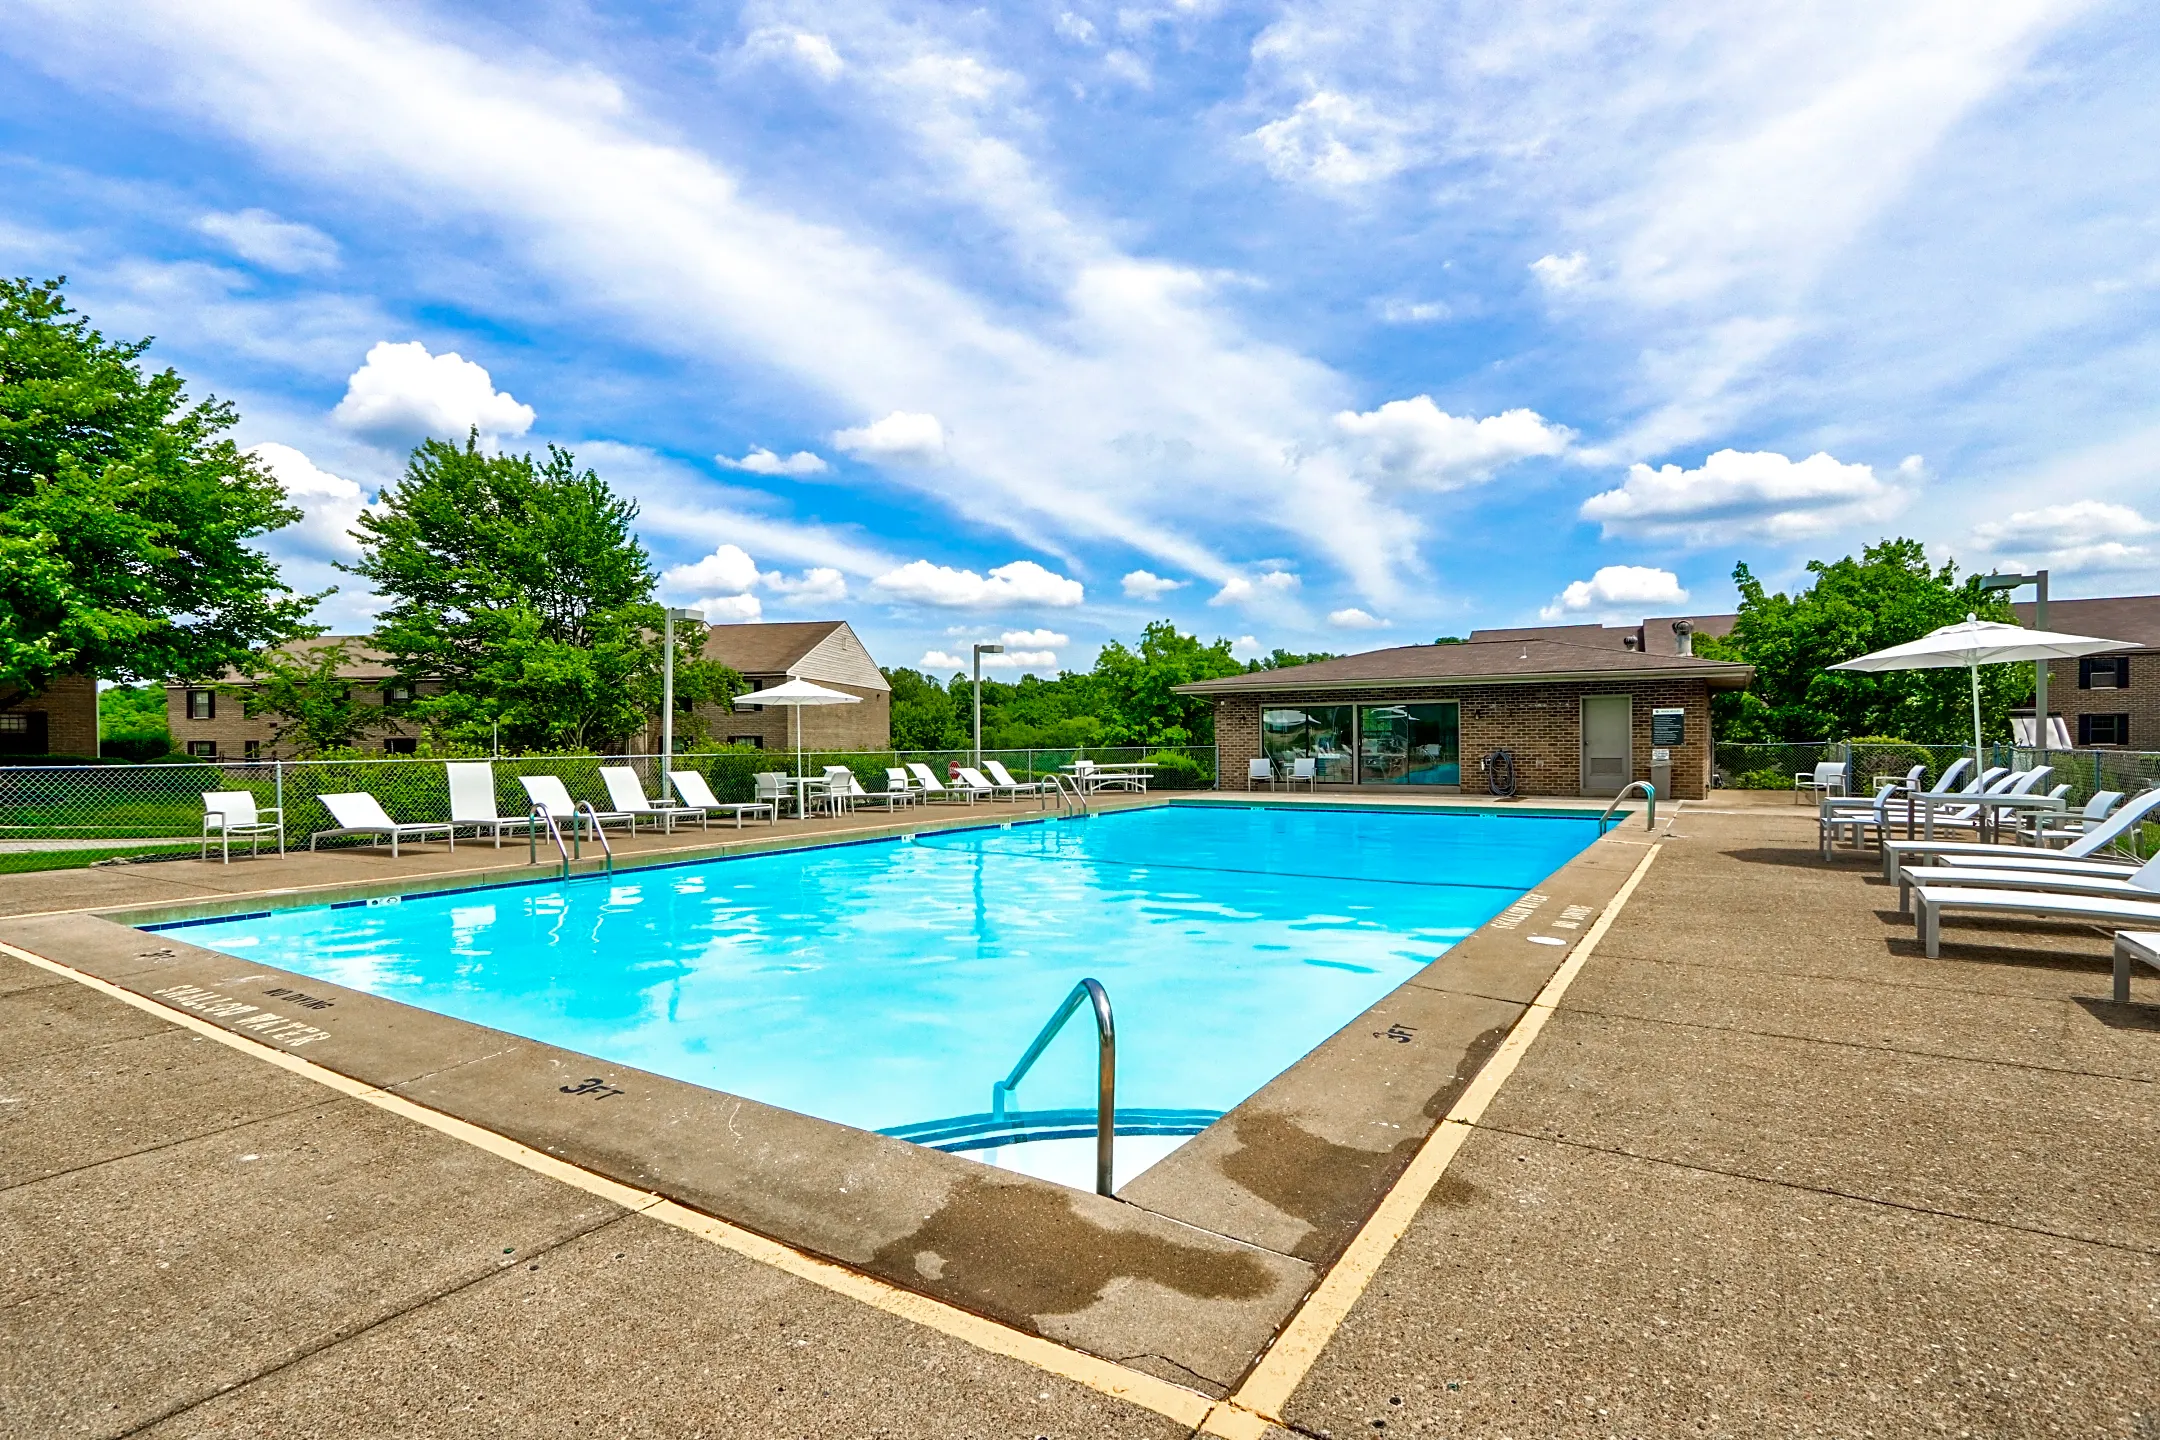 Pool - Stonecliffe - Monroeville, PA